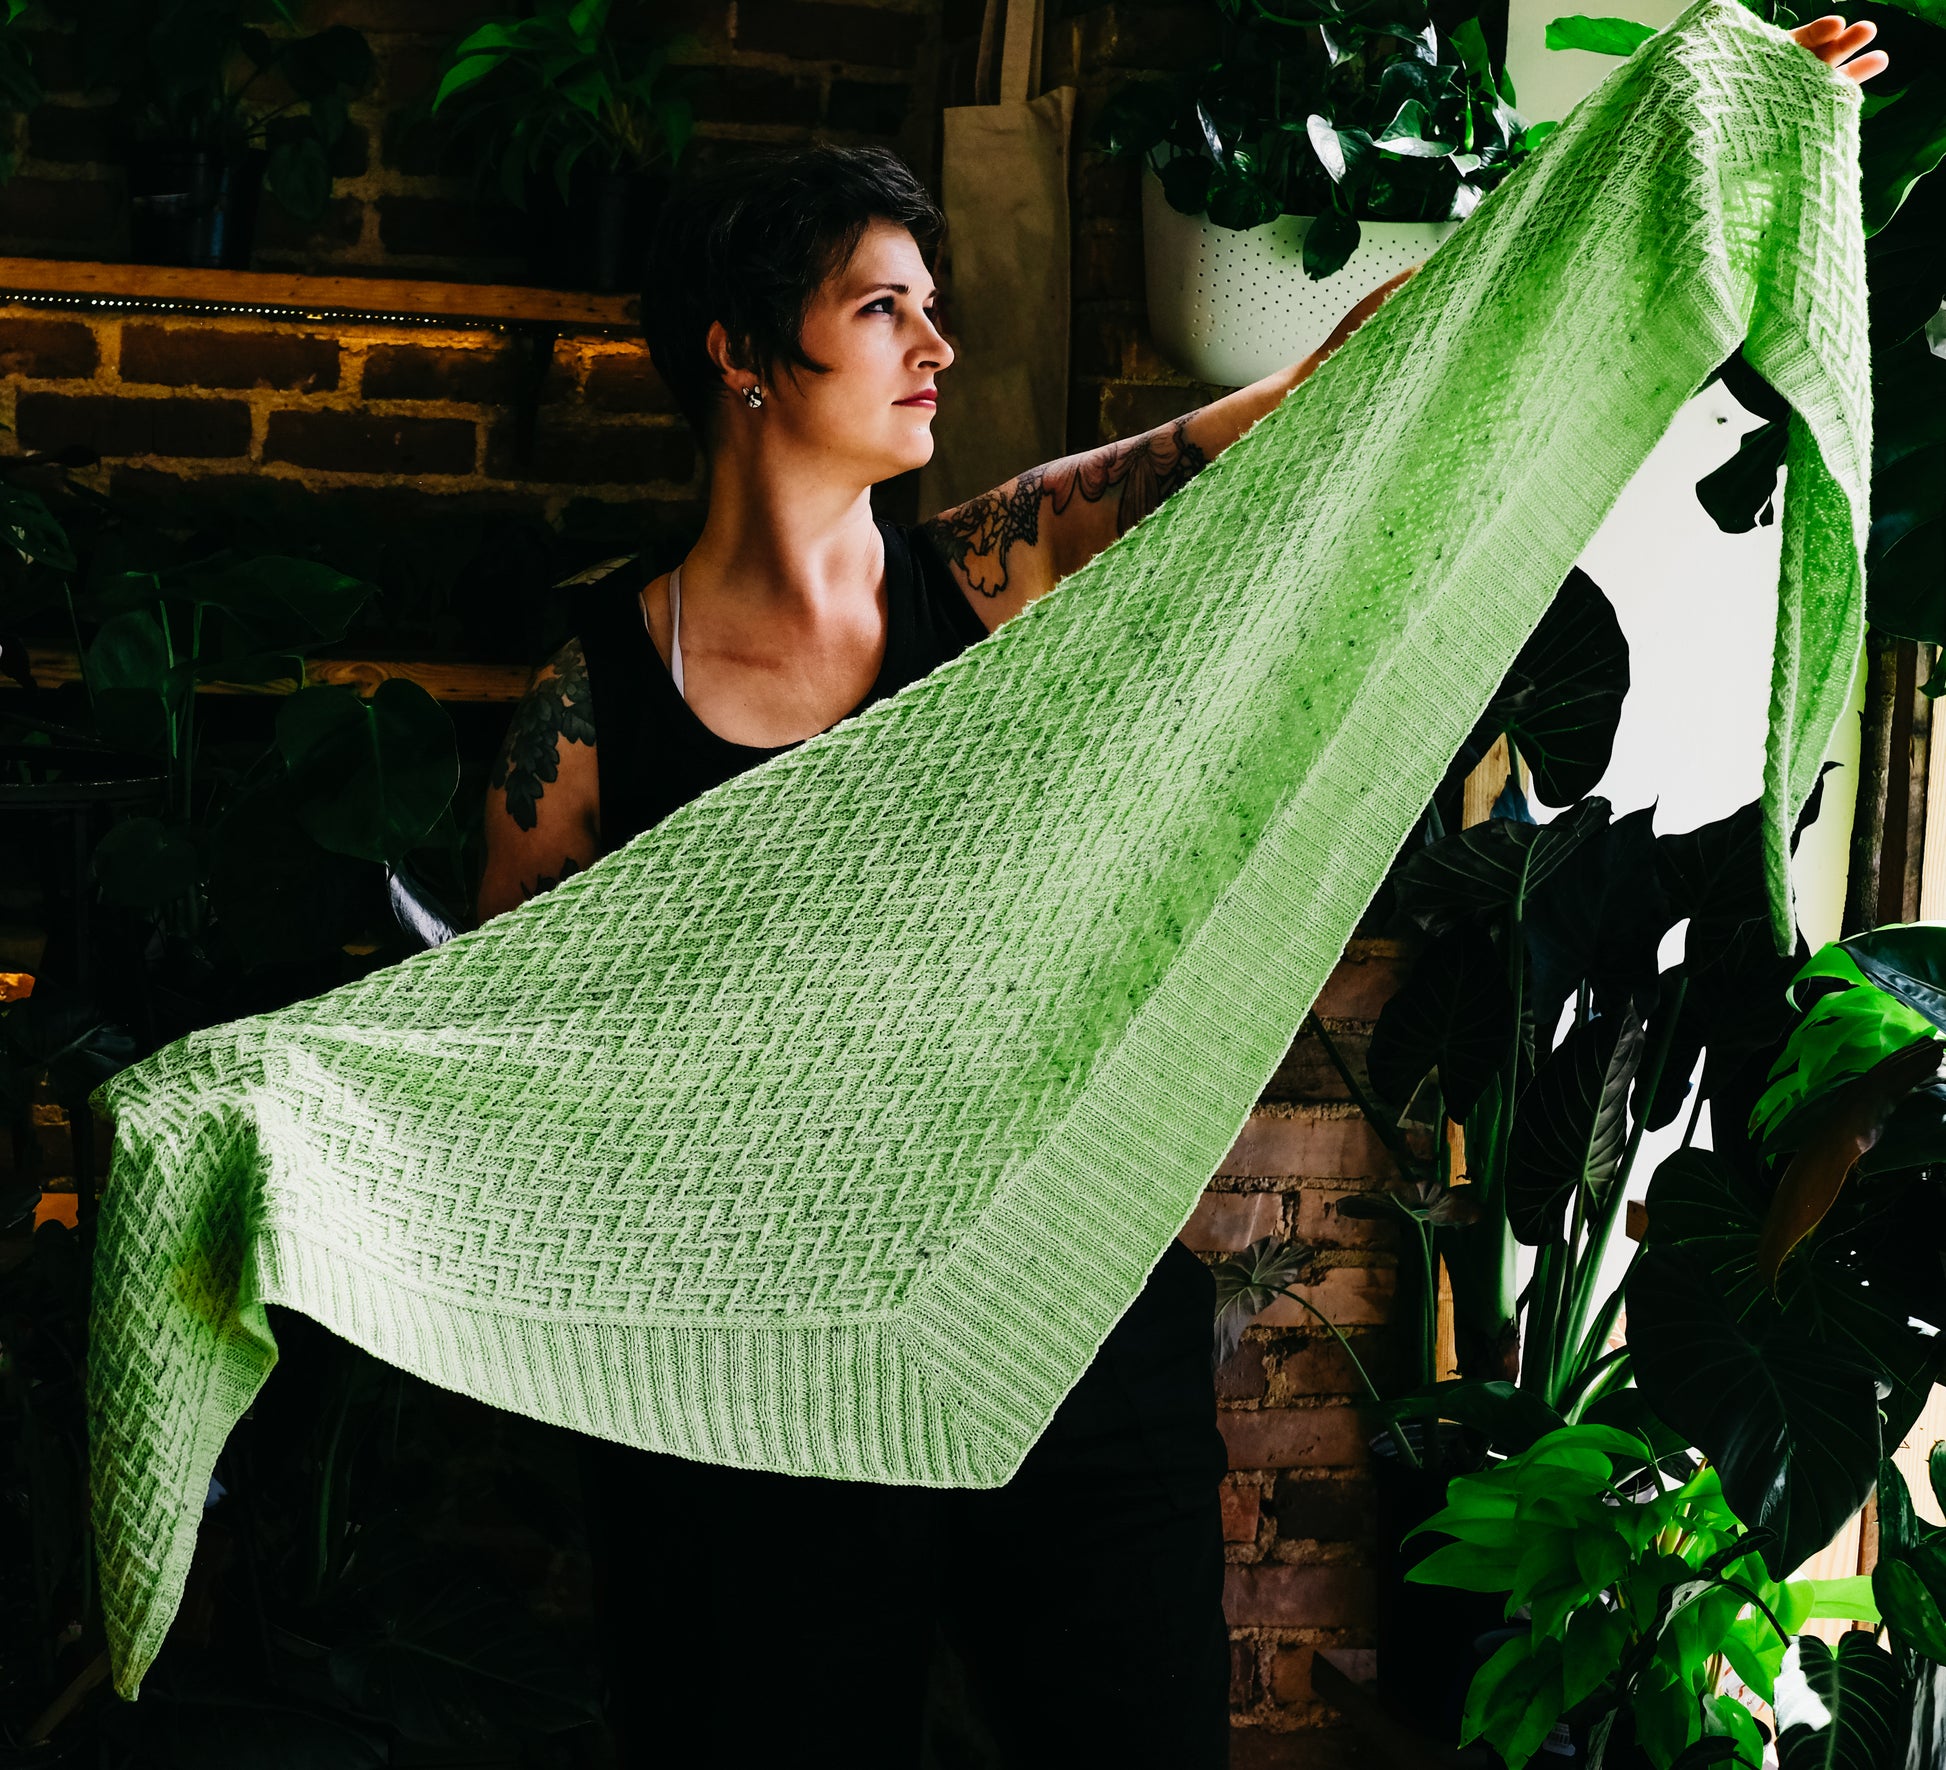 Seen from the front, Jen looks off camera, holding open a triangle, hand knit shawl. Knit in lime green yarn, the shawl features a chevron pattern and a ribbed edge along two sides of the triangle.